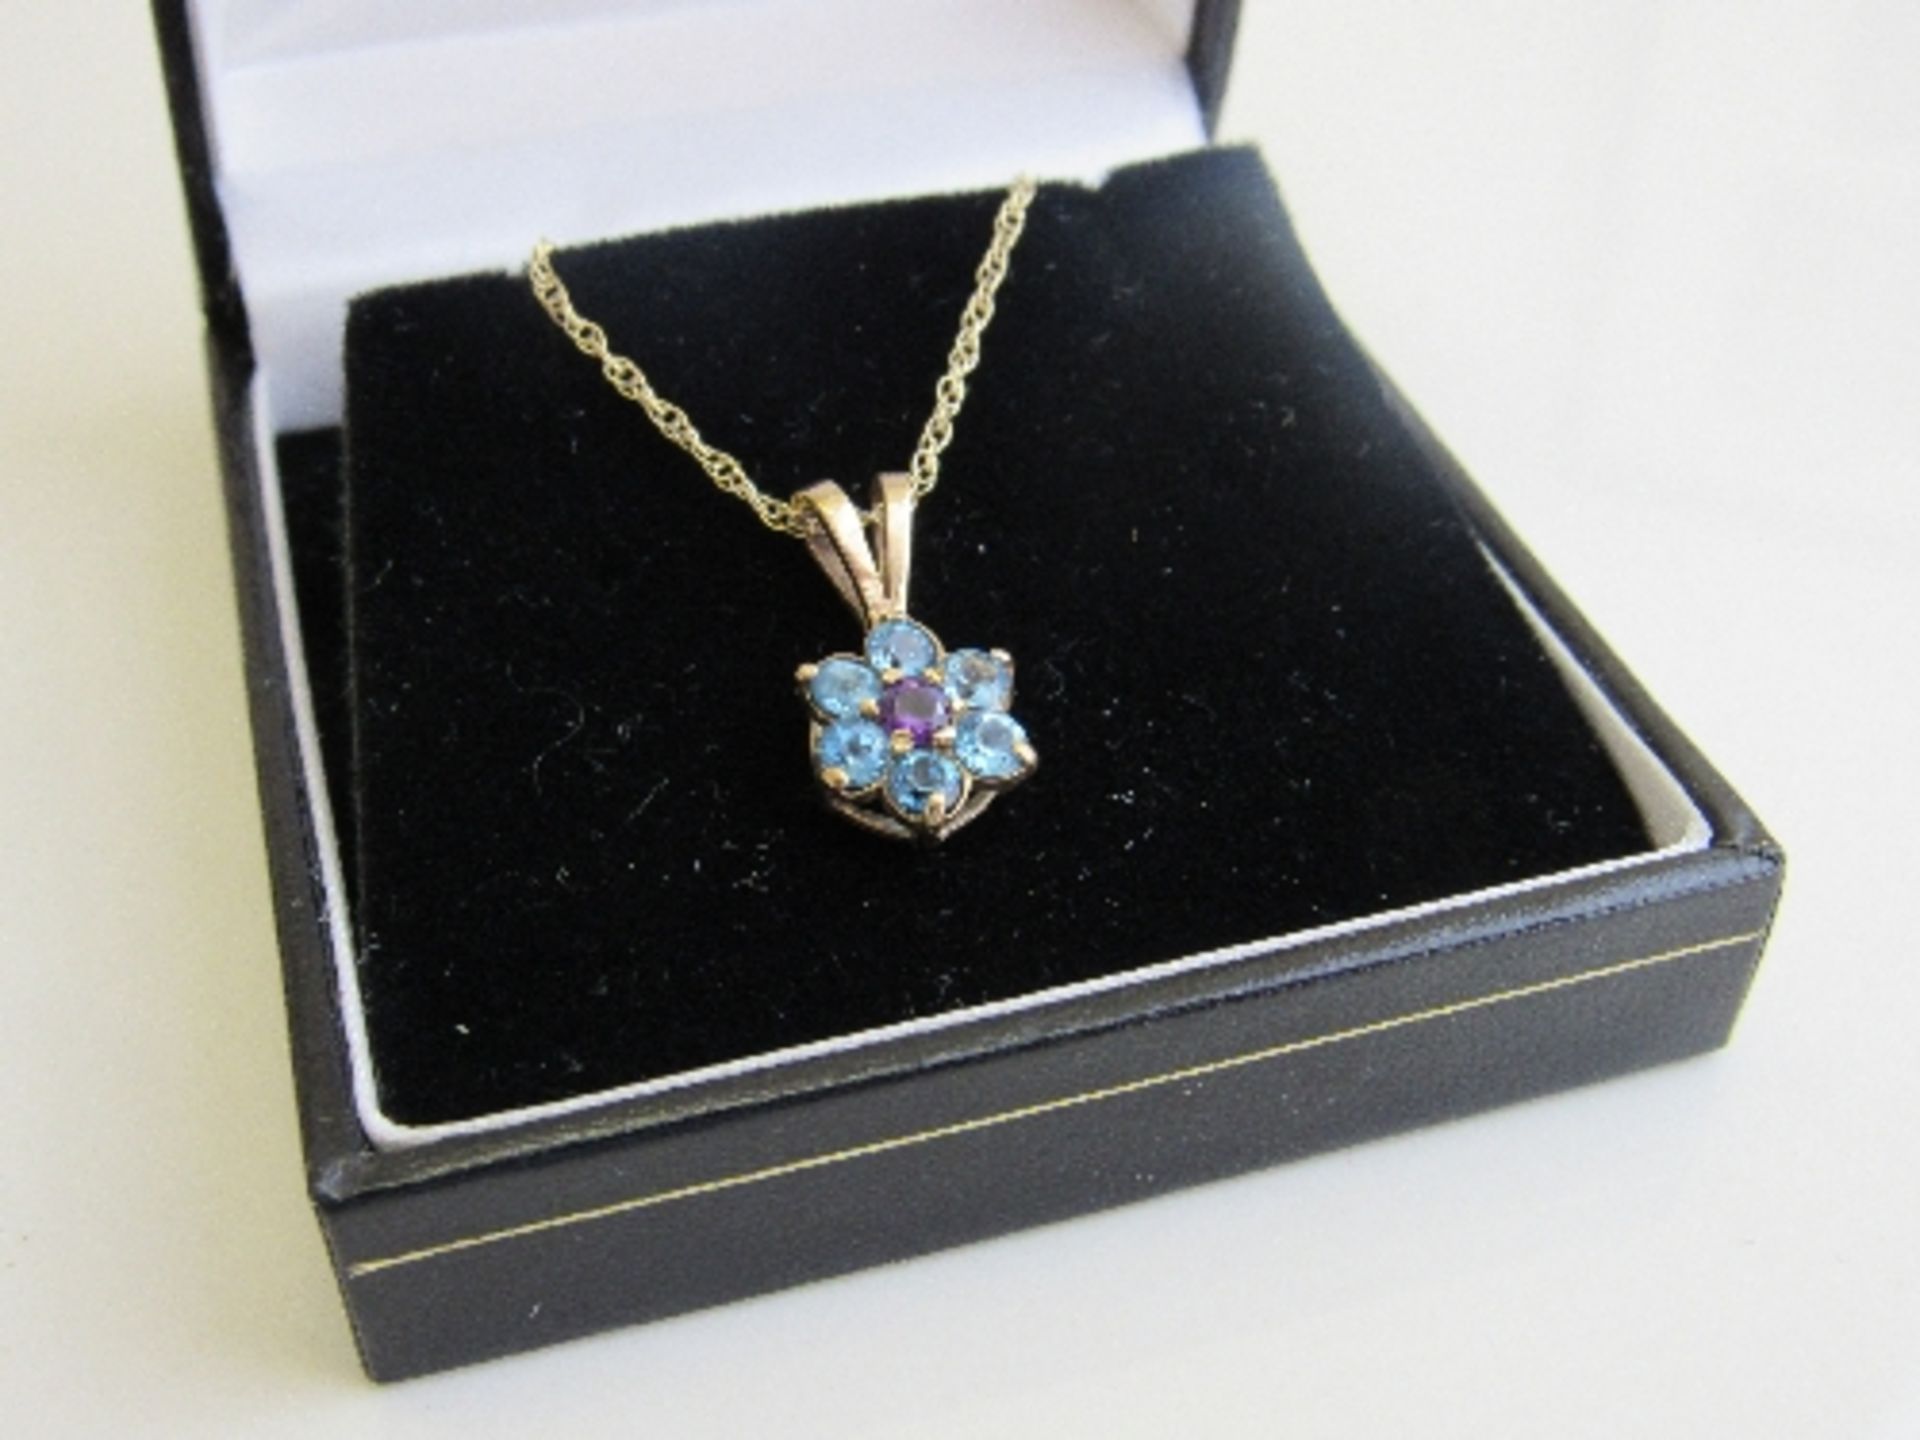 9ct gold, purple & pale blue stone flower pendant on 9ct gold chain, weight 1.9gms. Estimate £20-30 - Image 4 of 4